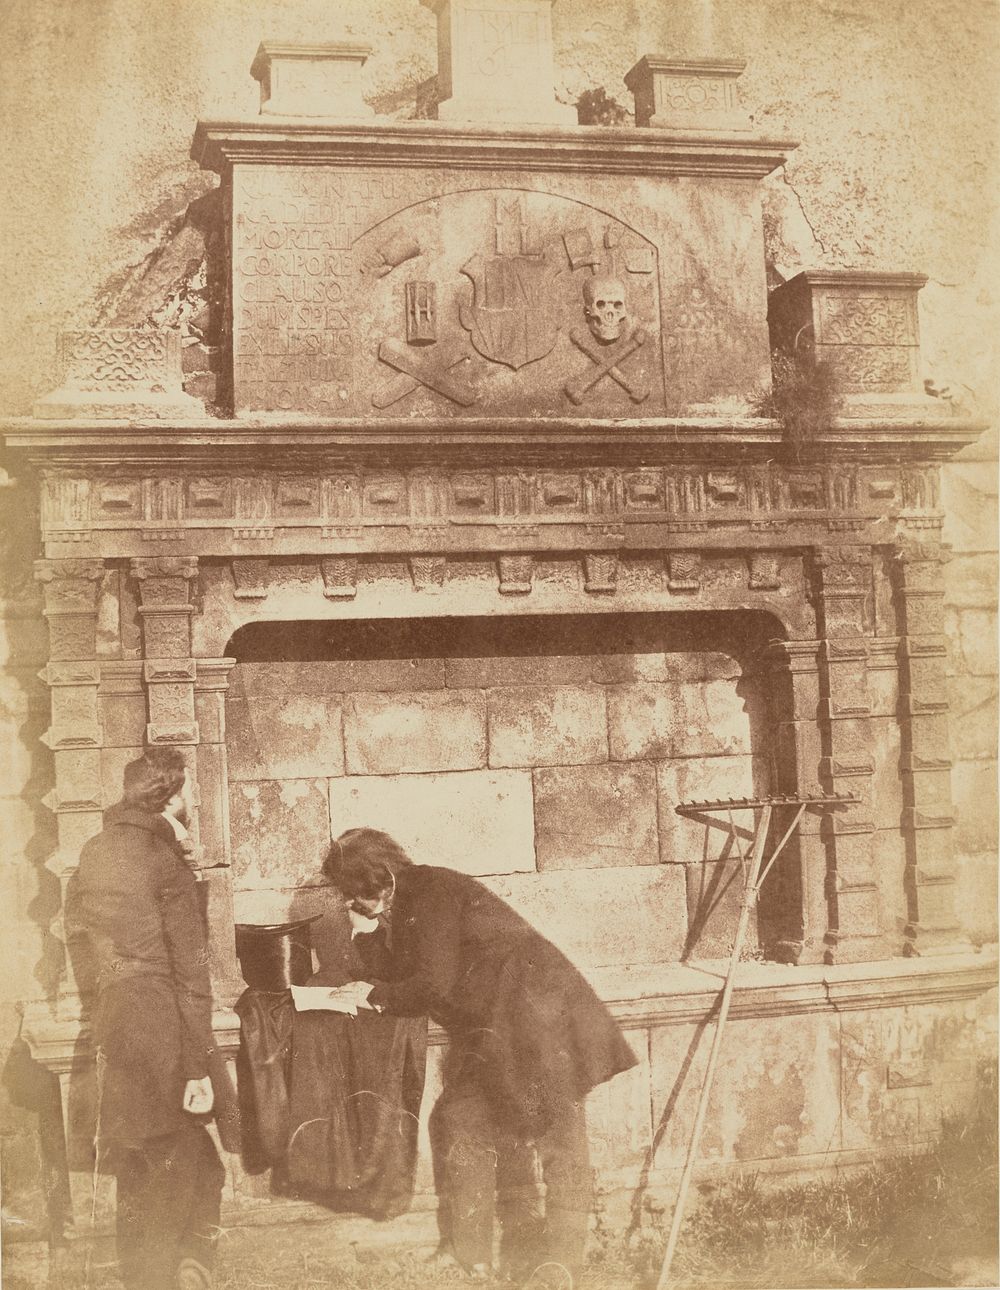 D.O.Hill and a Friend at the Bethune Monument, Greyfriars, Edinburgh by Hill and Adamson